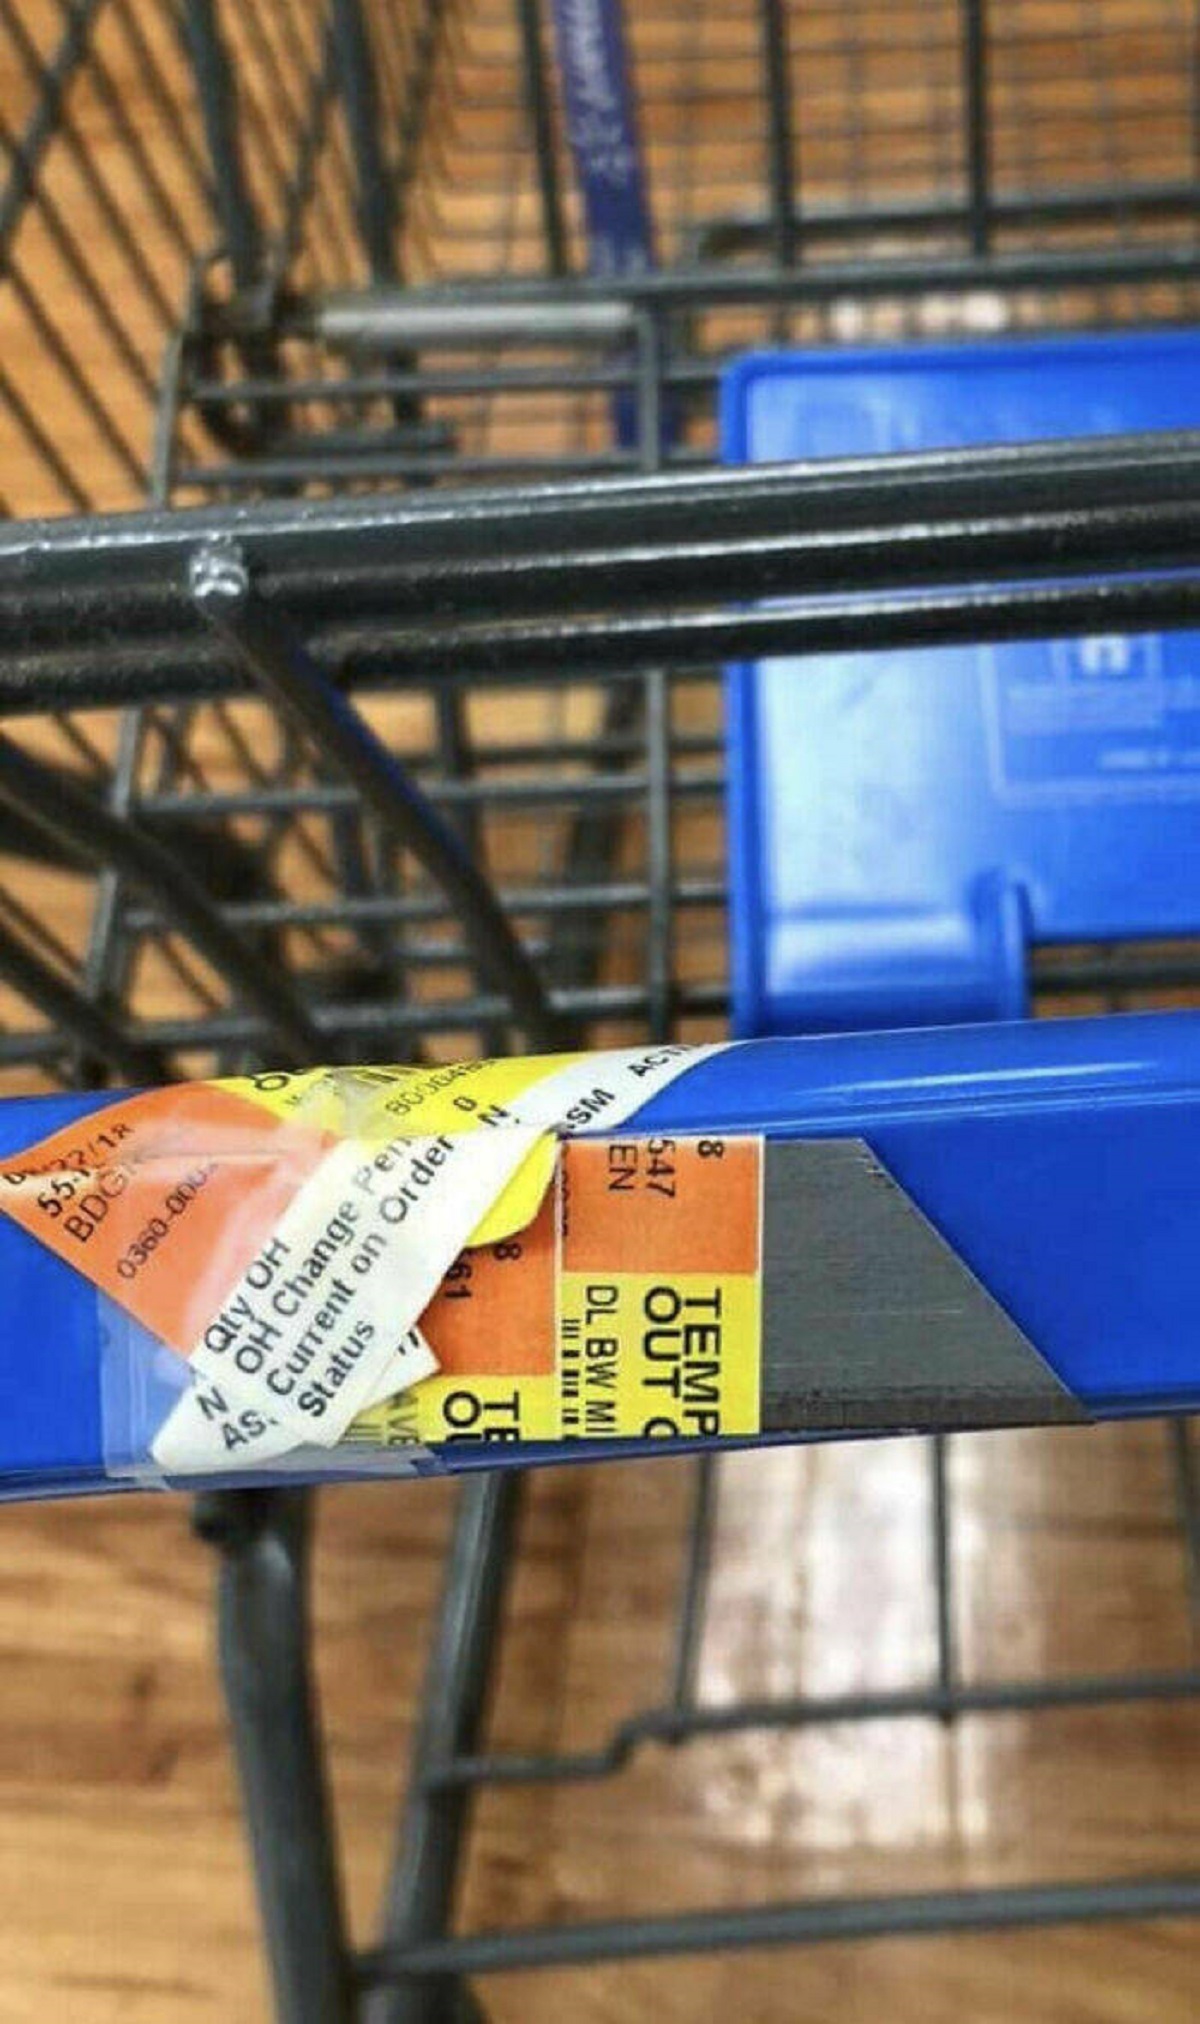 "Someone Taped A Razor Blade To A Shopping Cart"